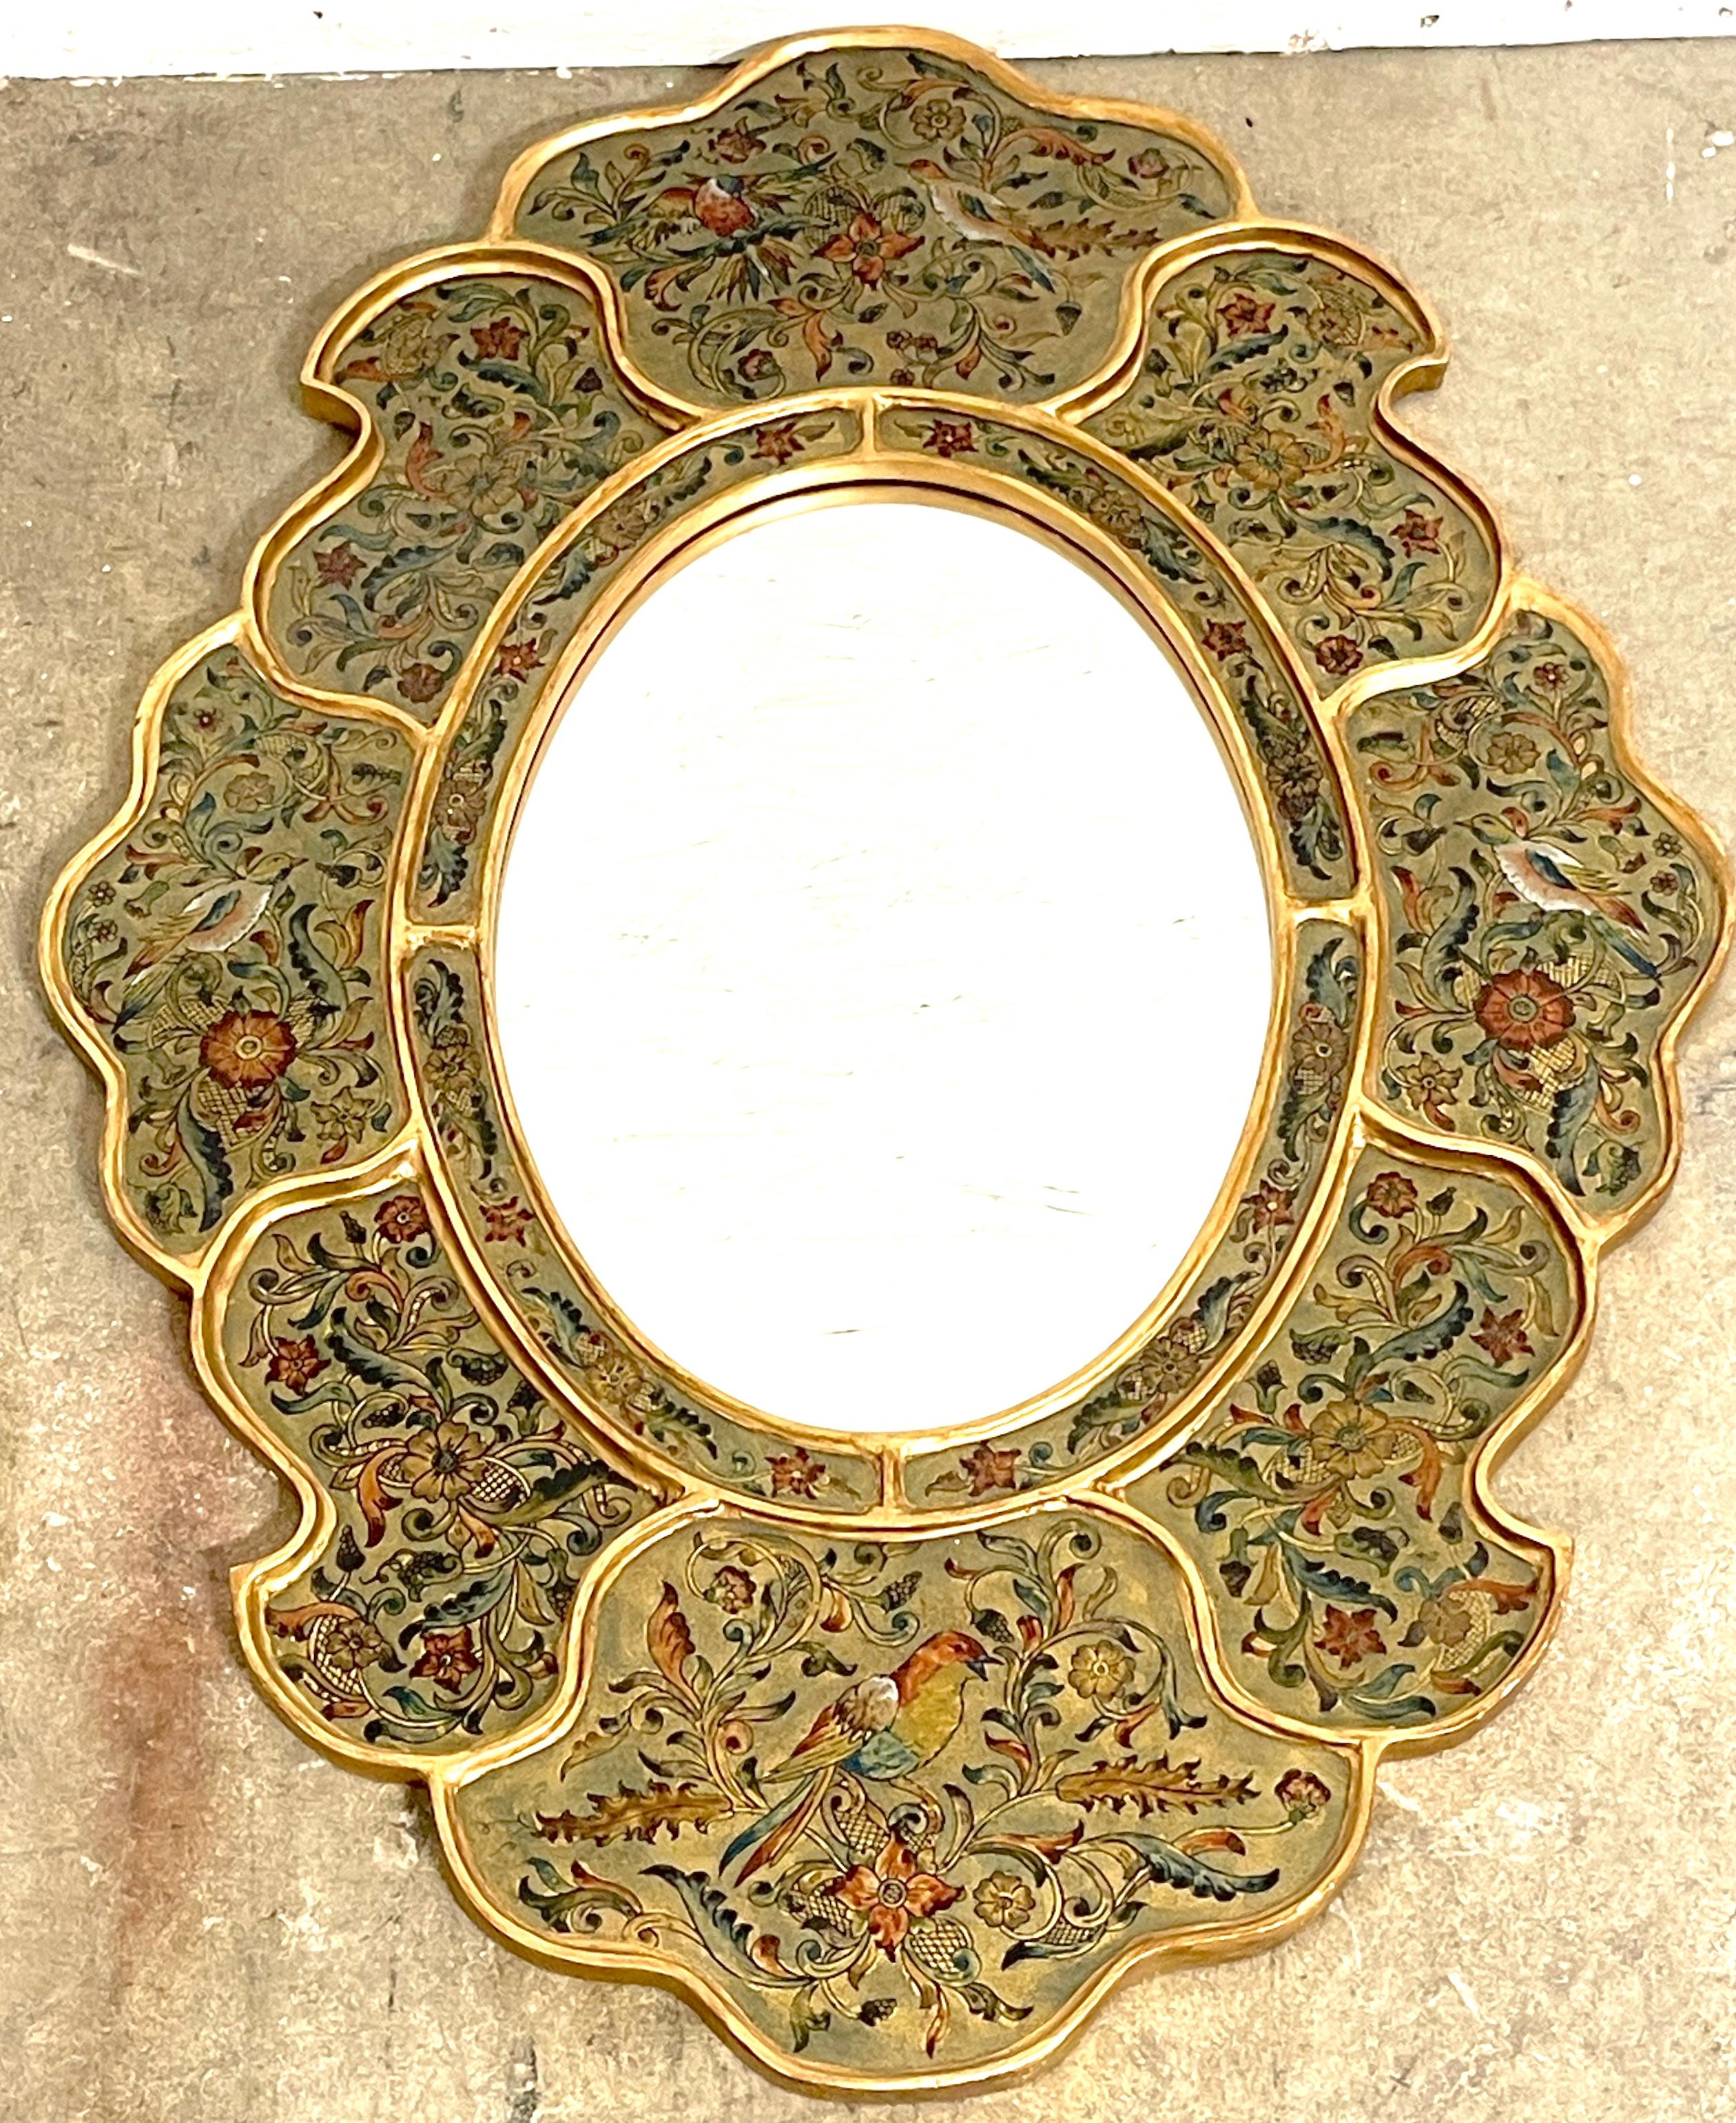 Hand-Painted Spanish Colonial Bird & Floral Decorated Gilt Scalloped Verre Églomisé Mirror For Sale